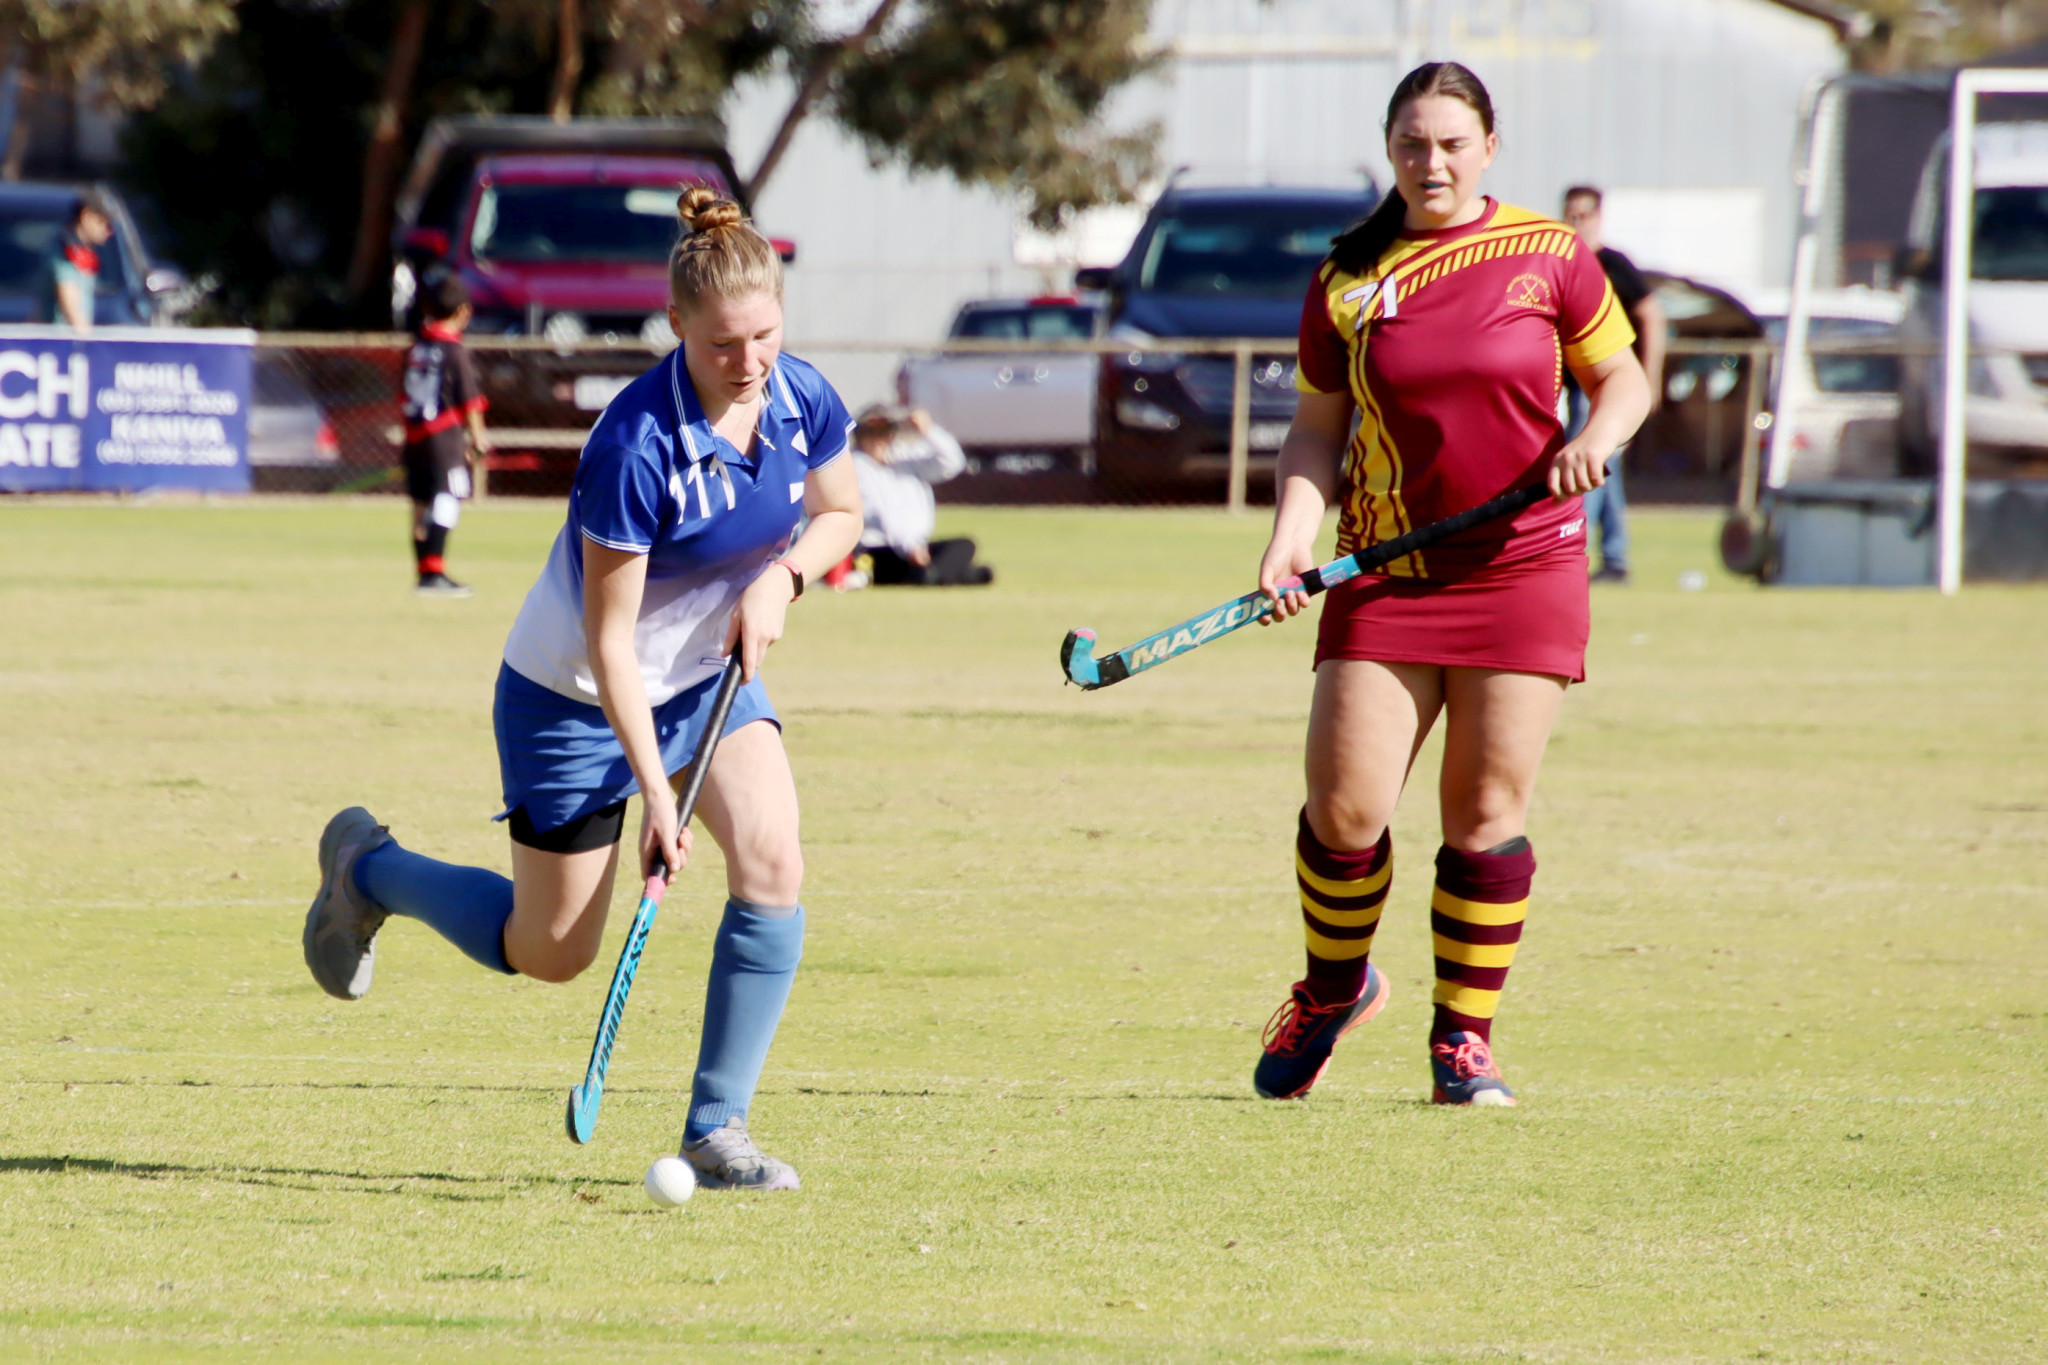 Imogen Williams runs with the ball while Warracknabeal’s Clarice Bennett looks for an opportunity to tackle.